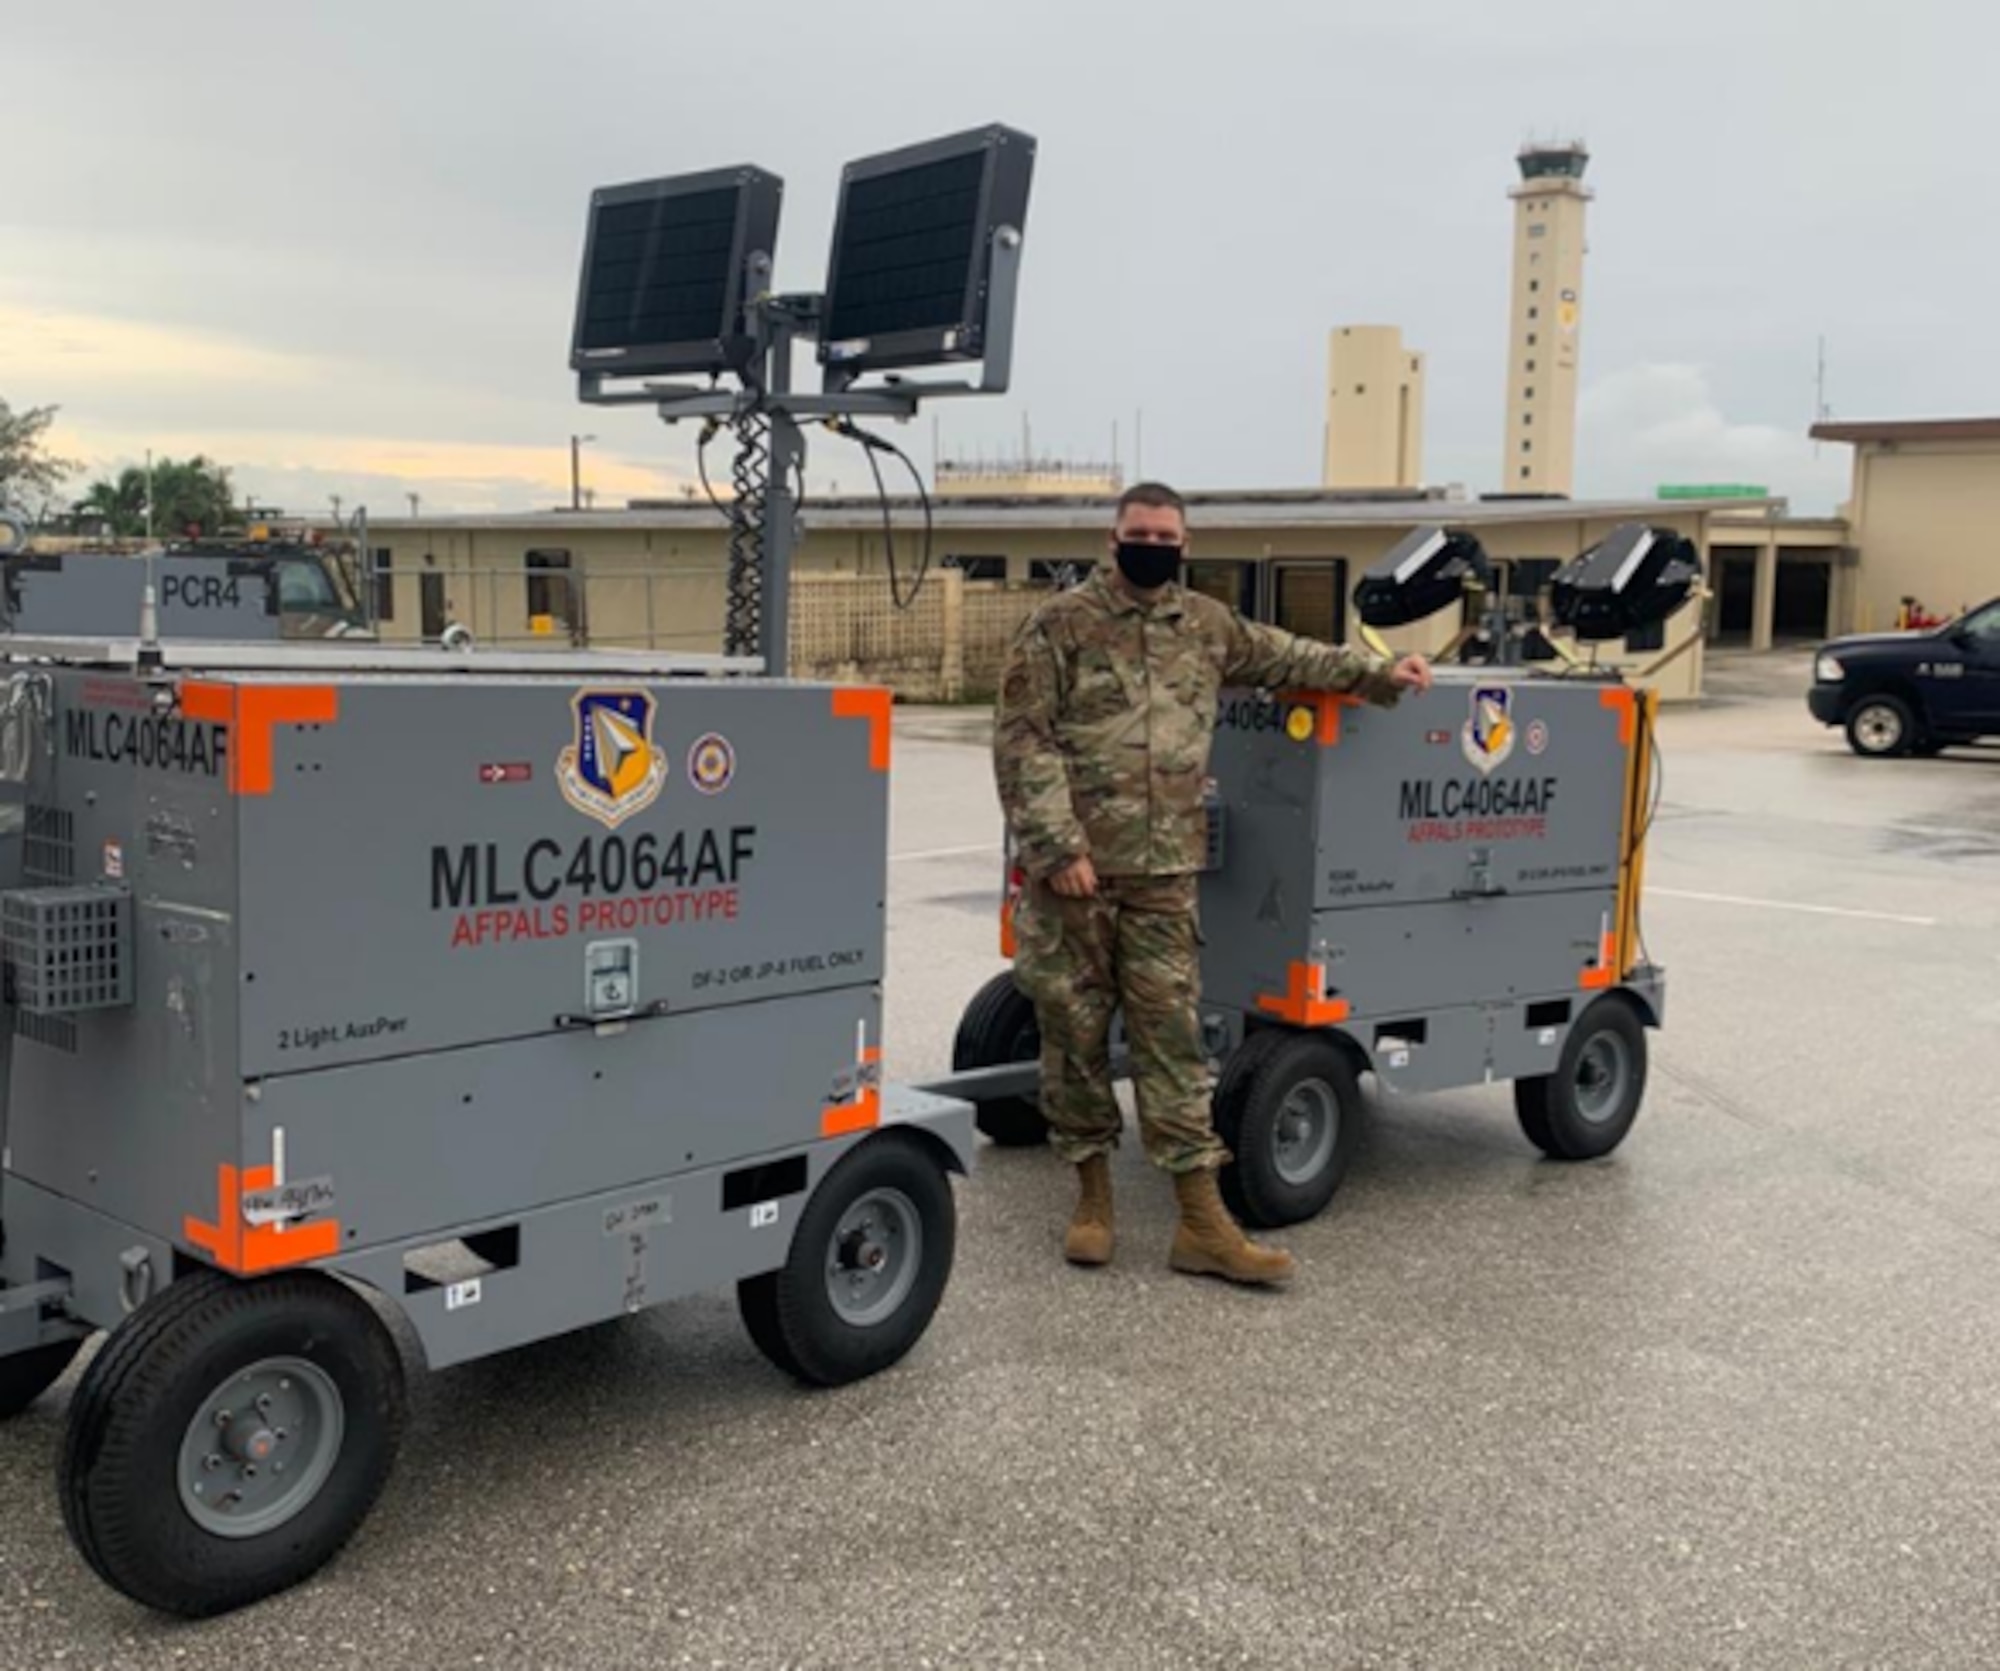 Staff Sgt. Ryan Merritt, 36th Maintenance Squadron, with the Advanced Flightline Power and Lighting System (AFPALS) hybrid light cart prototype is shown in his role as the equipment custodian and evaluator during PACOM Valiant Shield 2020. (Courtesy photo)